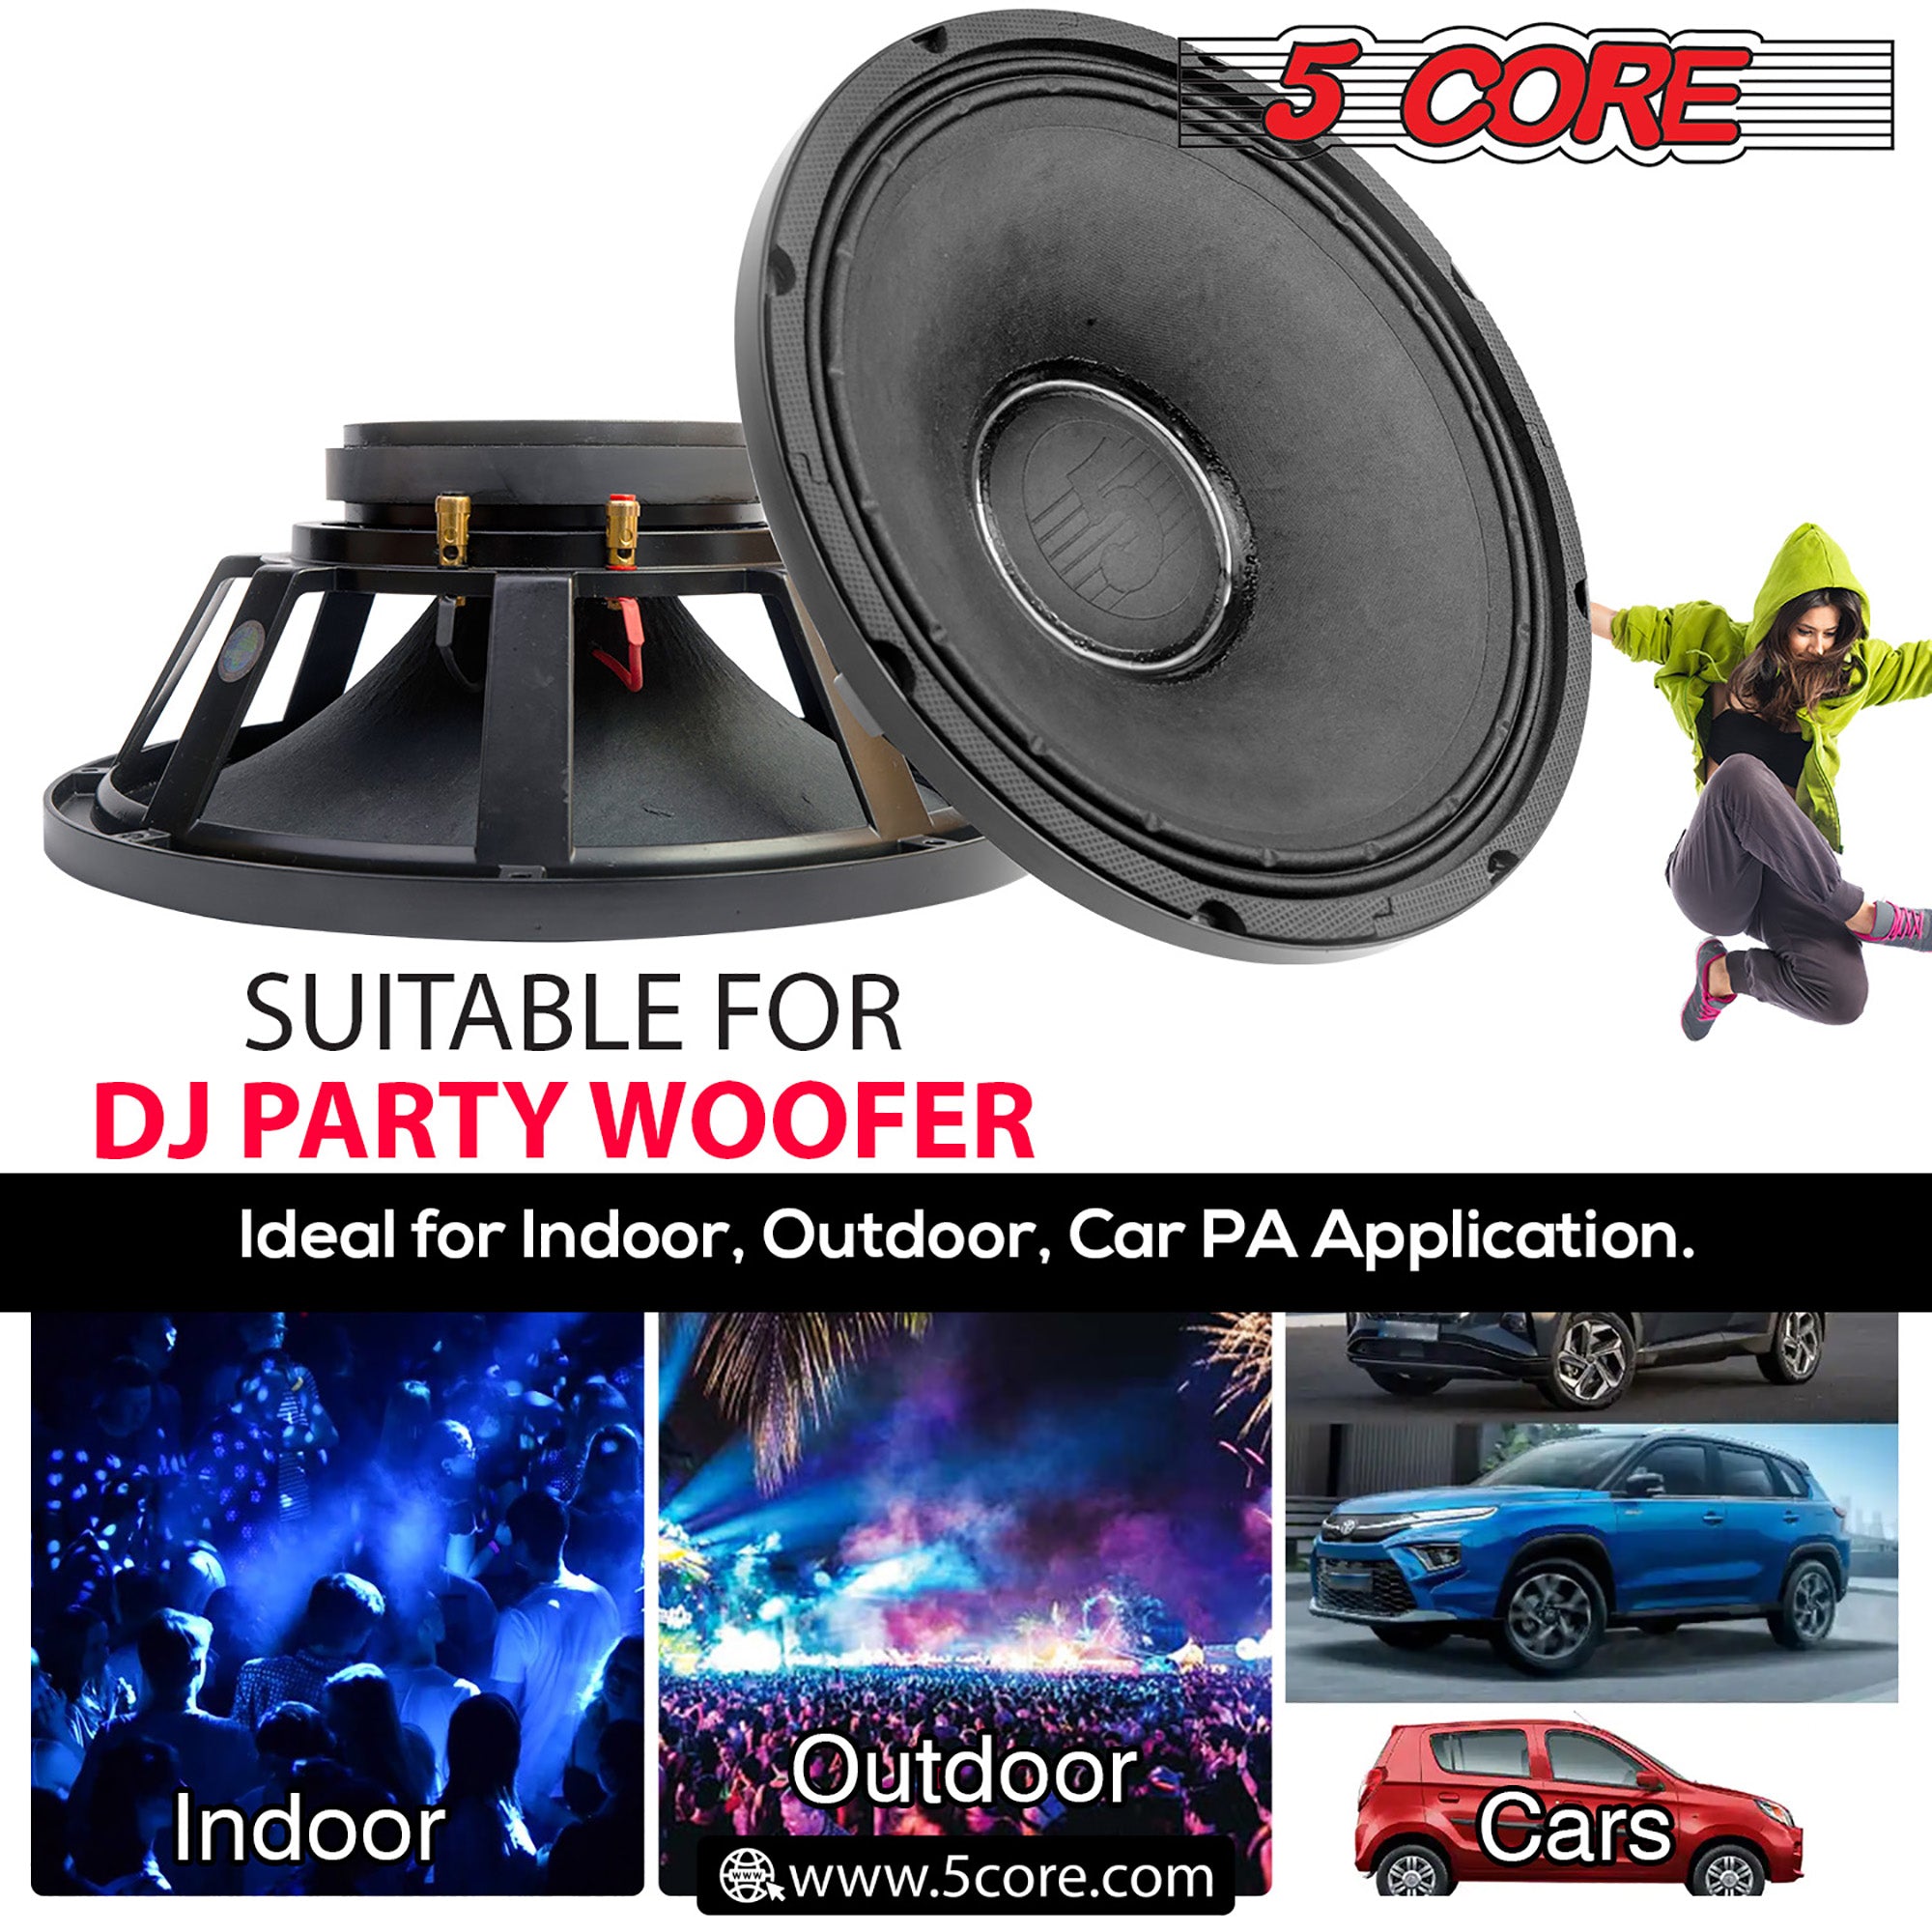 Suitable for Indoor & Outdoor , Car PA Application